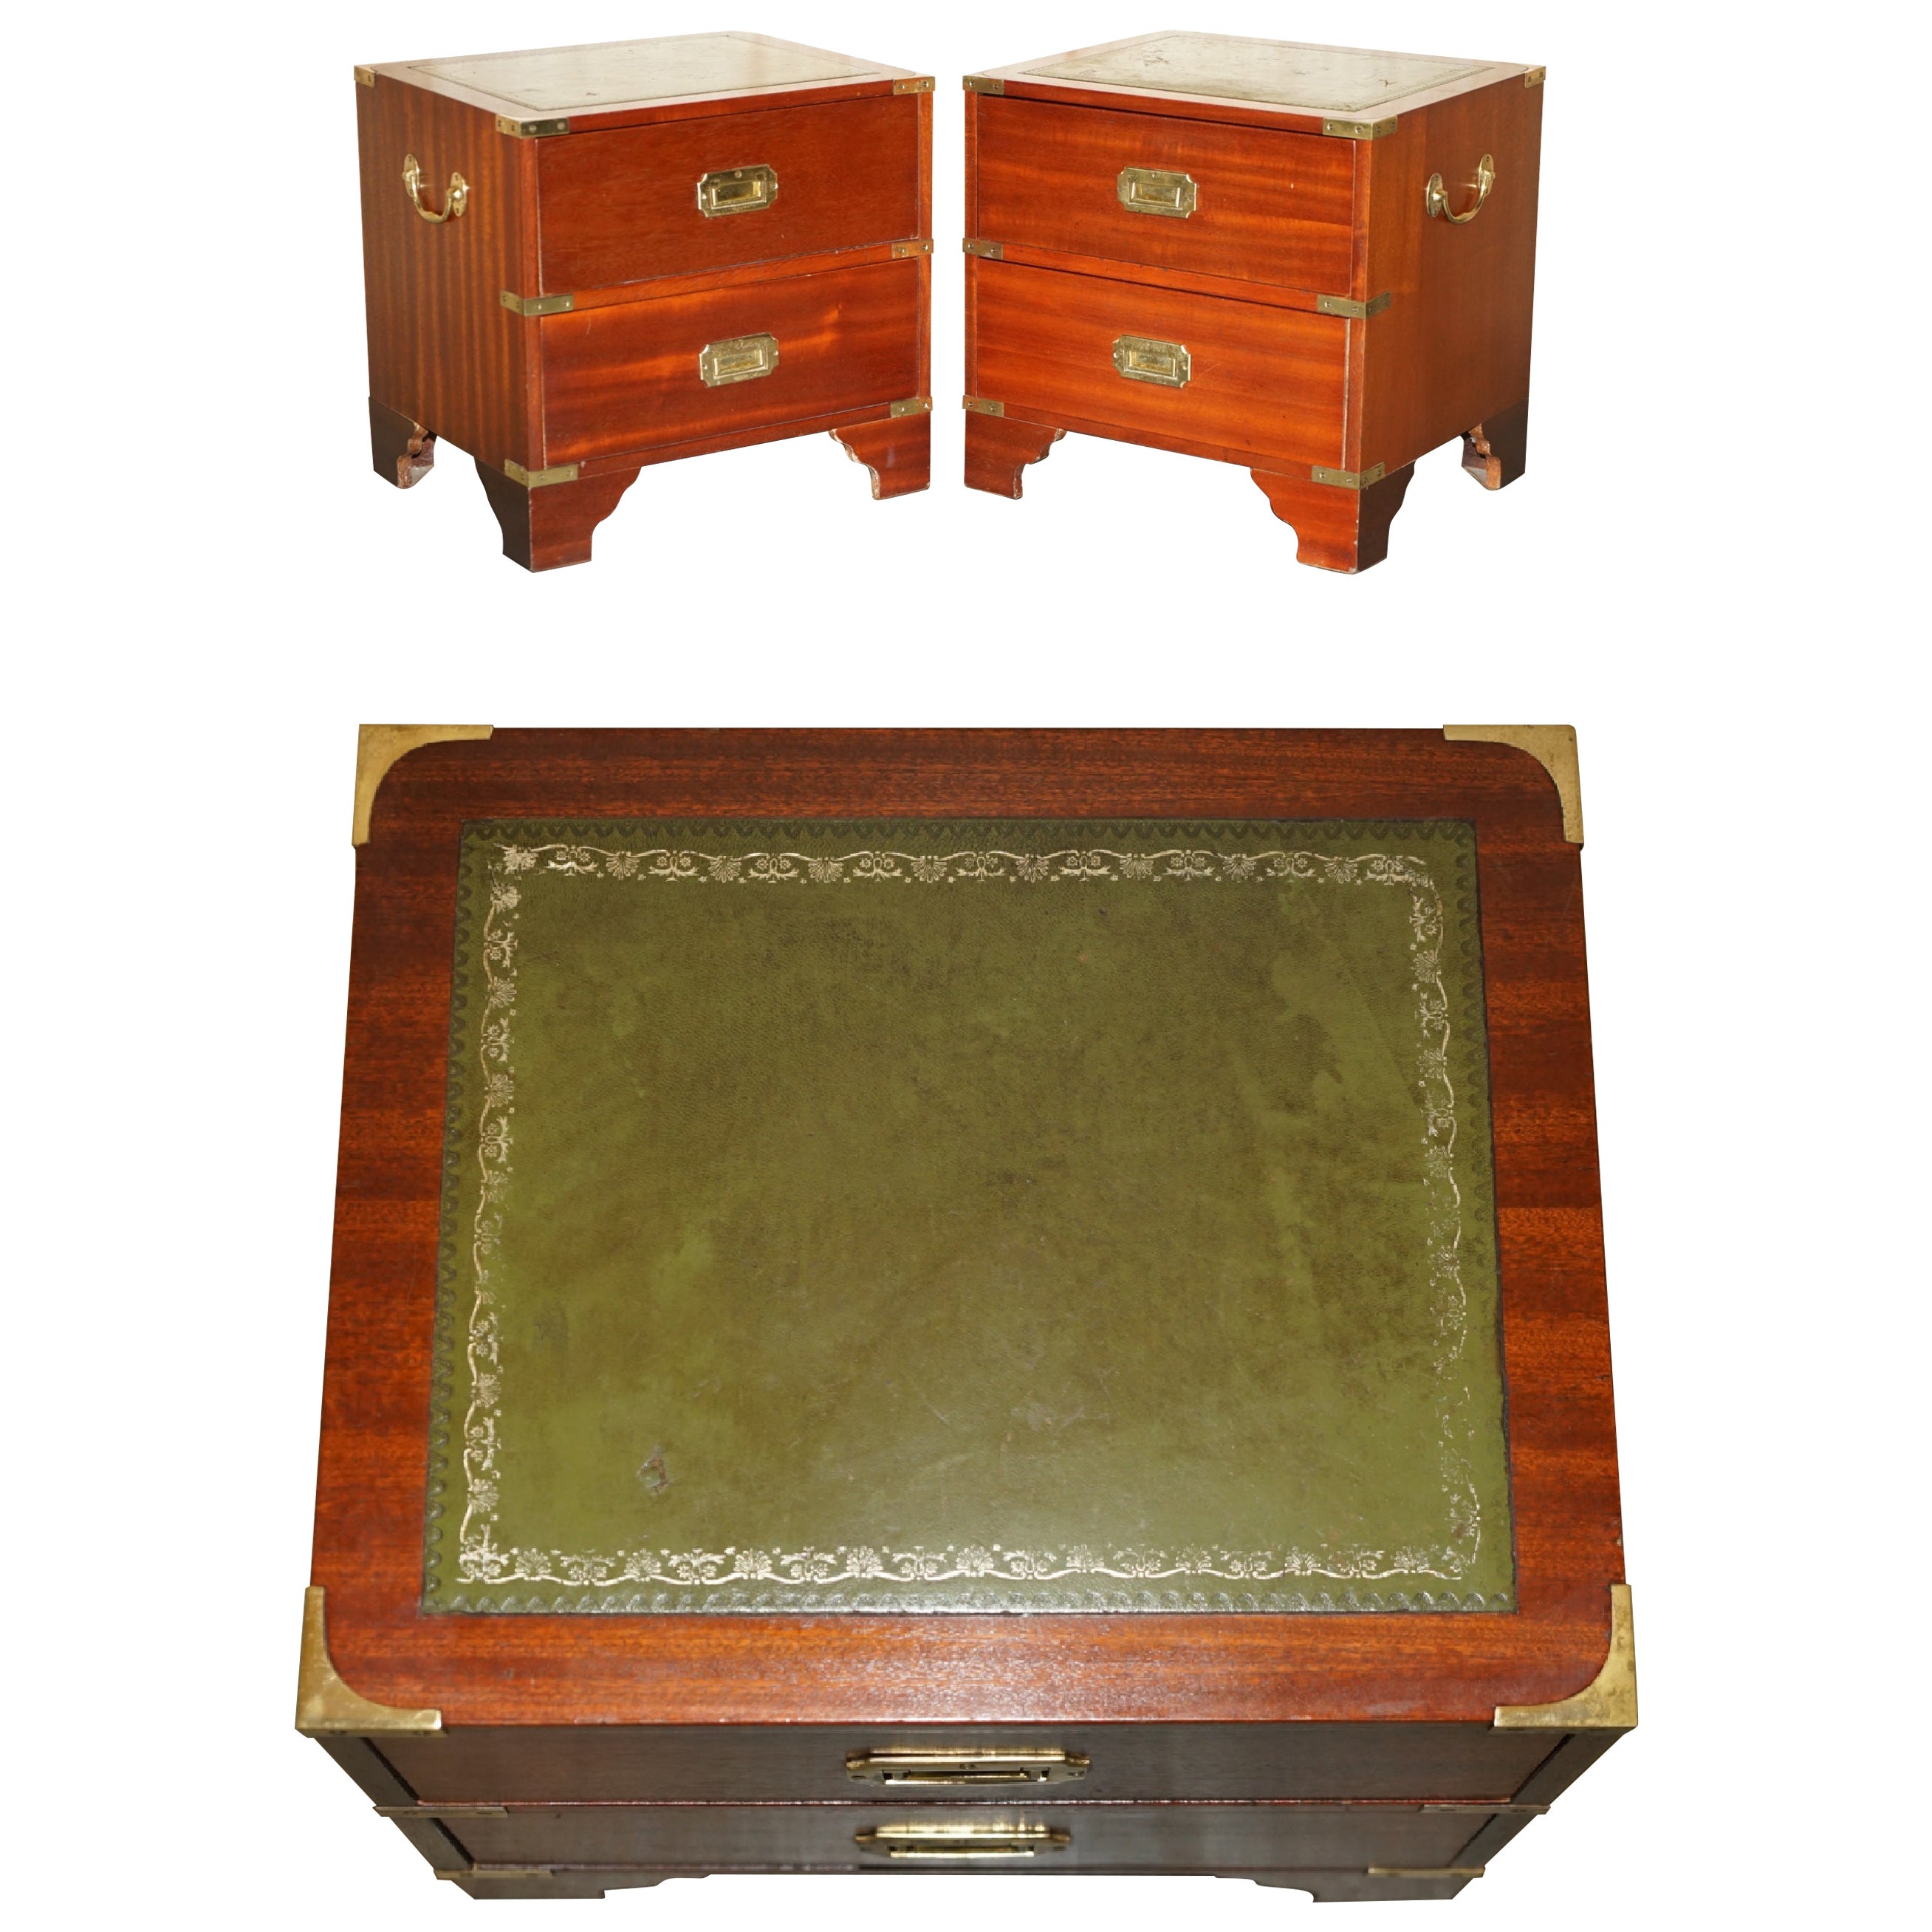 Pair of Harrods Kennedy Military Campaign Side End Table Drawers Green Leather